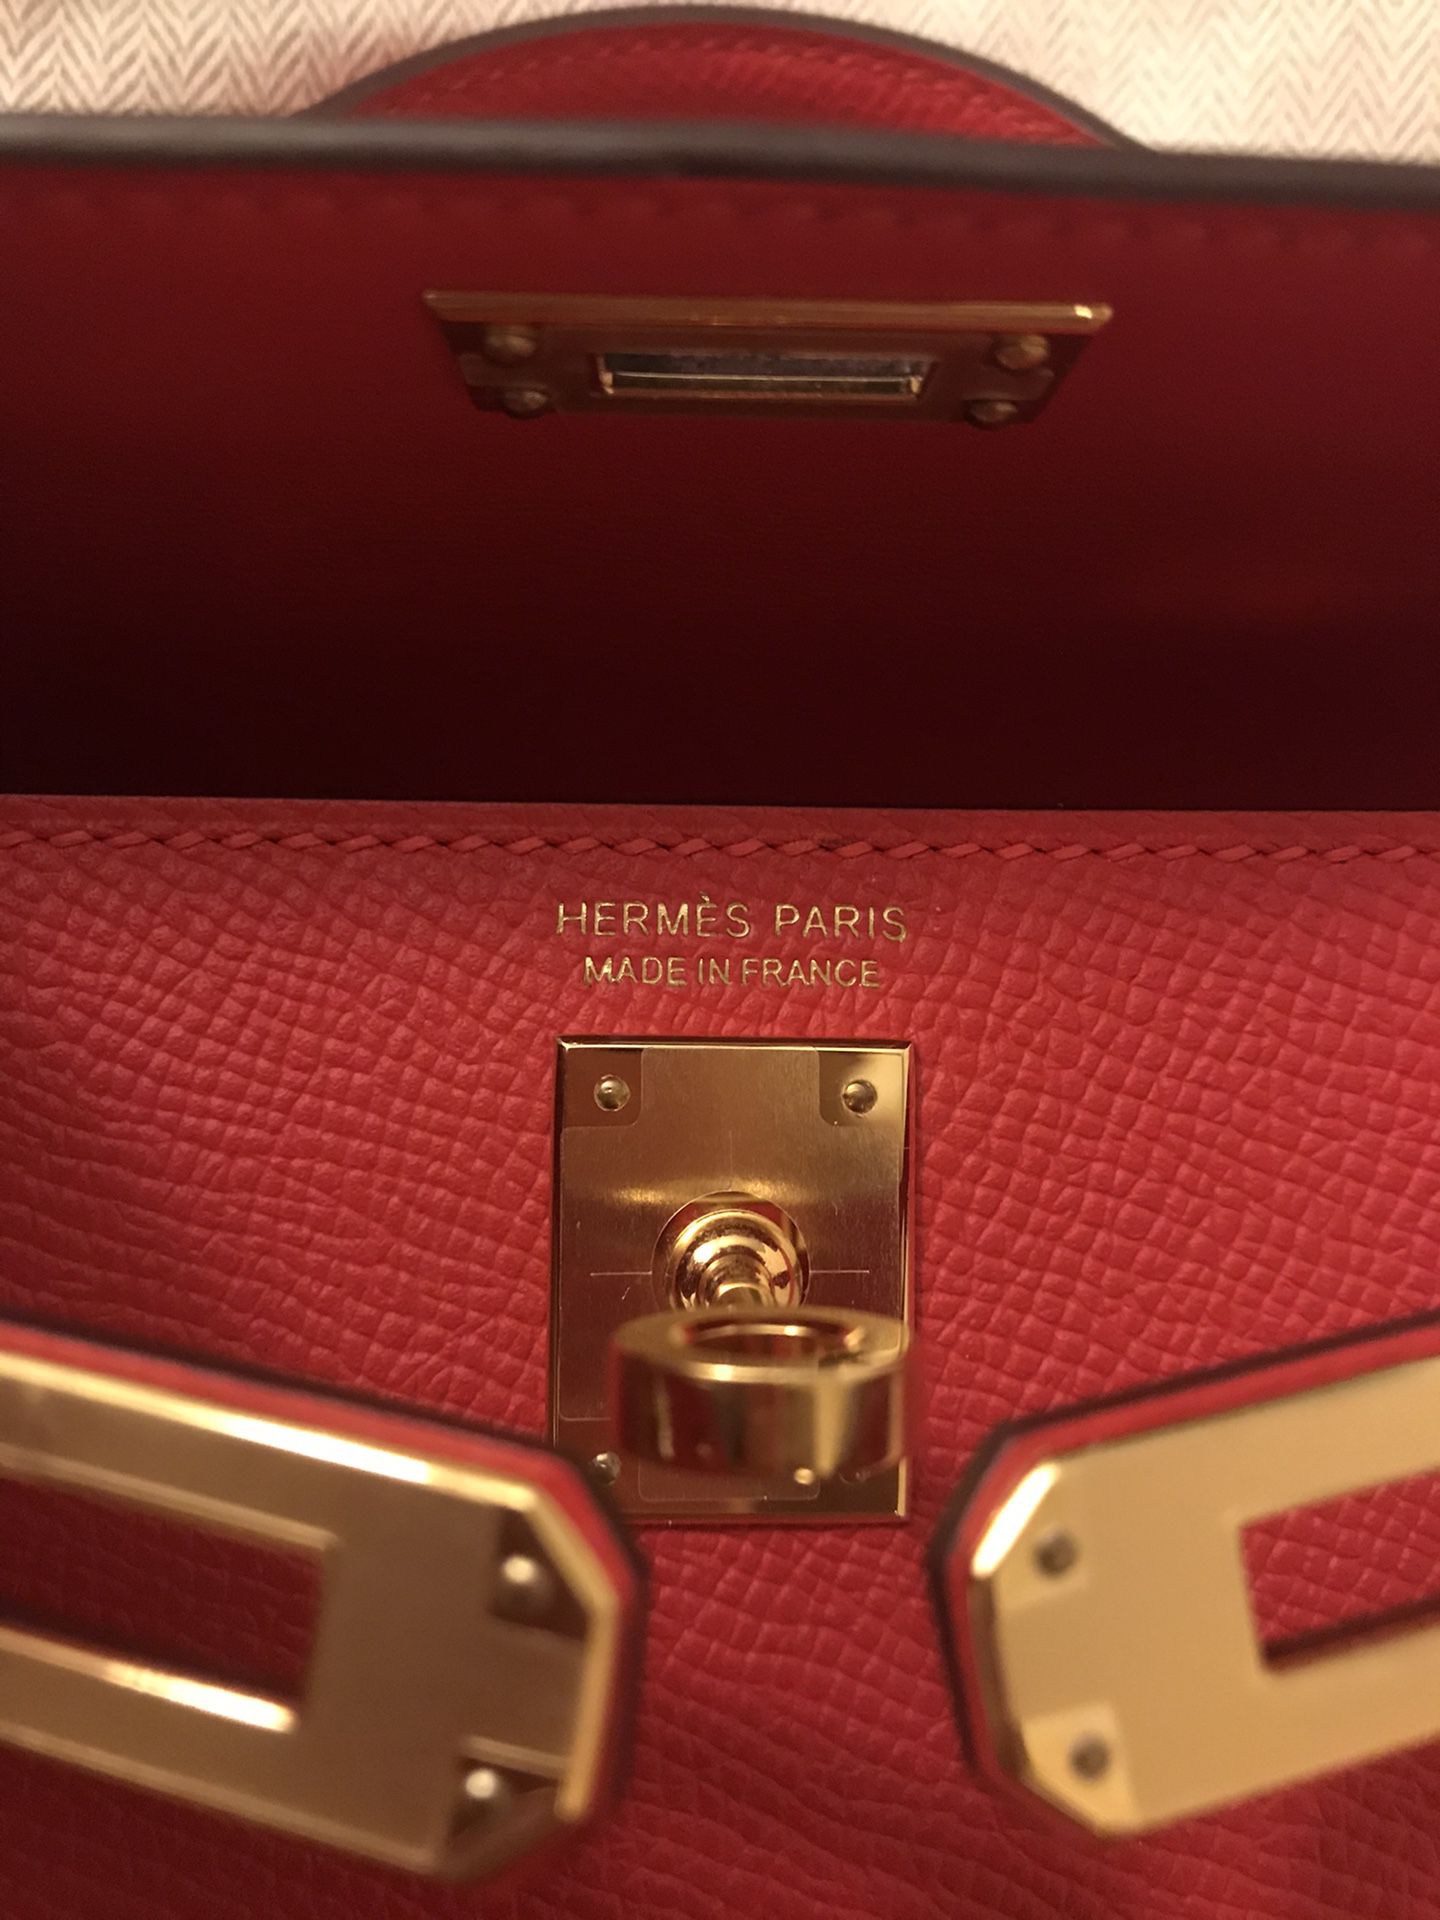 RUSH SALE!!! - GREAT DEAL PRICE AWAITS!🧊🎀 TOTALLY BRANDNEW IN BOX! HERMES  KELLY-25